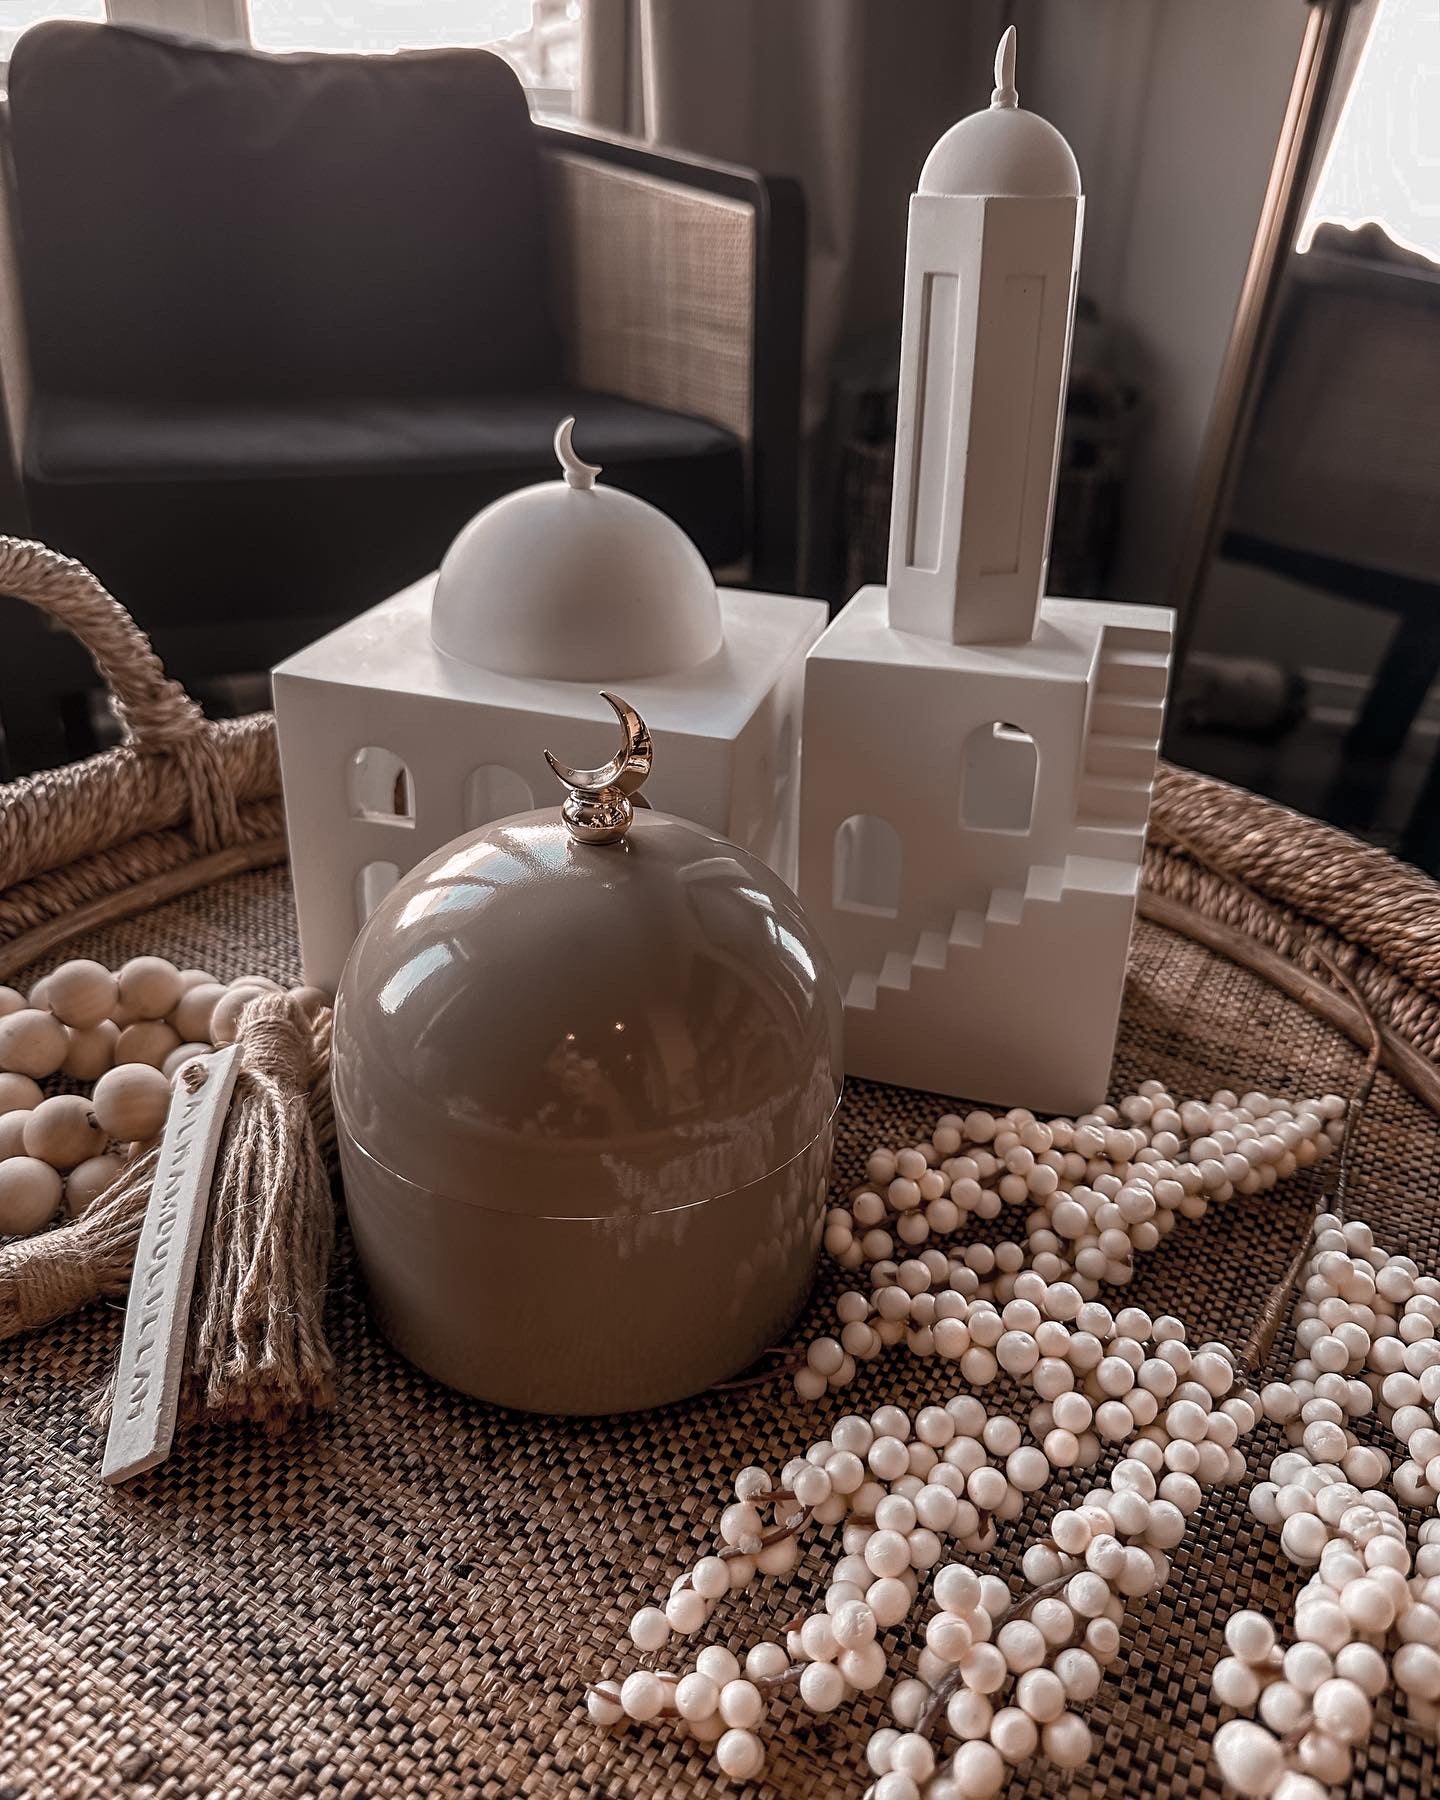 Dome shaped jar with crescent moon handle/topper, Ceramic mosque & minaret decorative statues, and some large, wooden tasbih beads, inside a shallow, round, woven basket atop a coffee table.